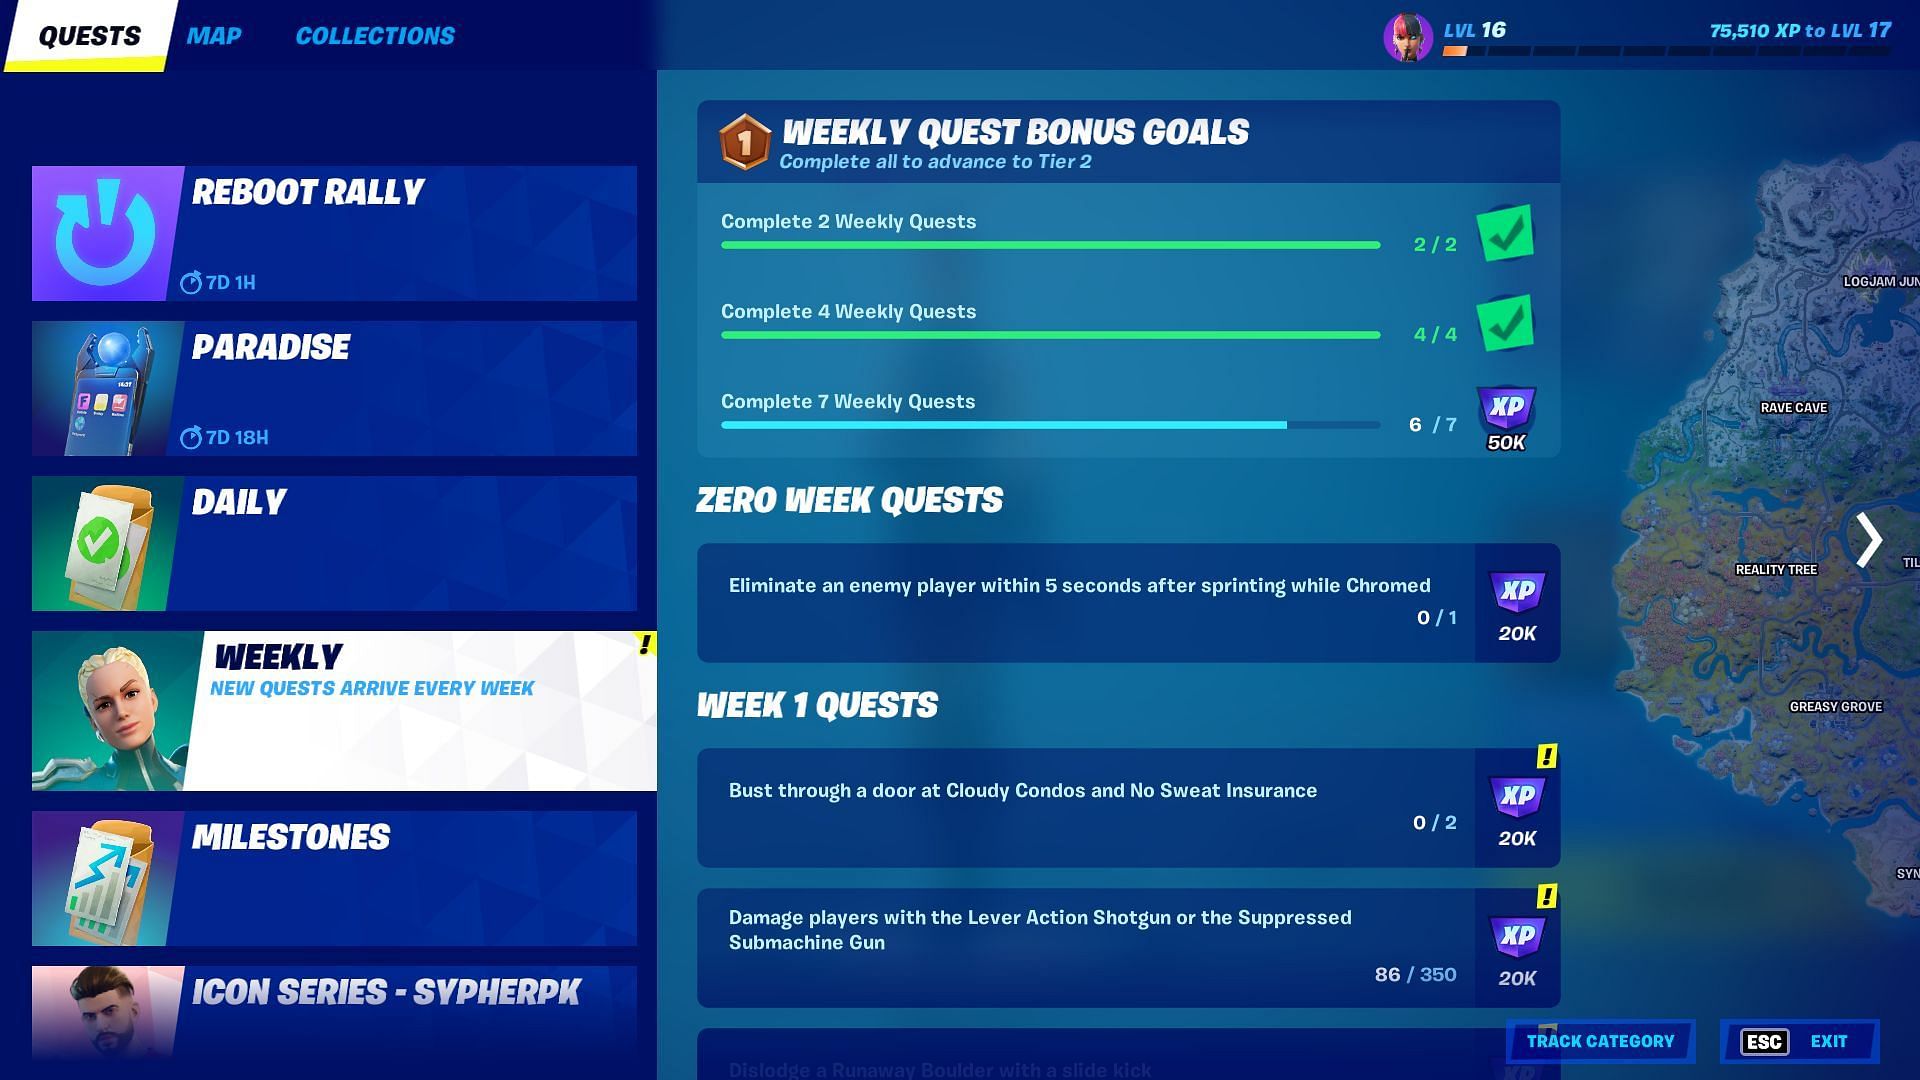 These challenges provide a lot of XP every week (Image via Epic Games)